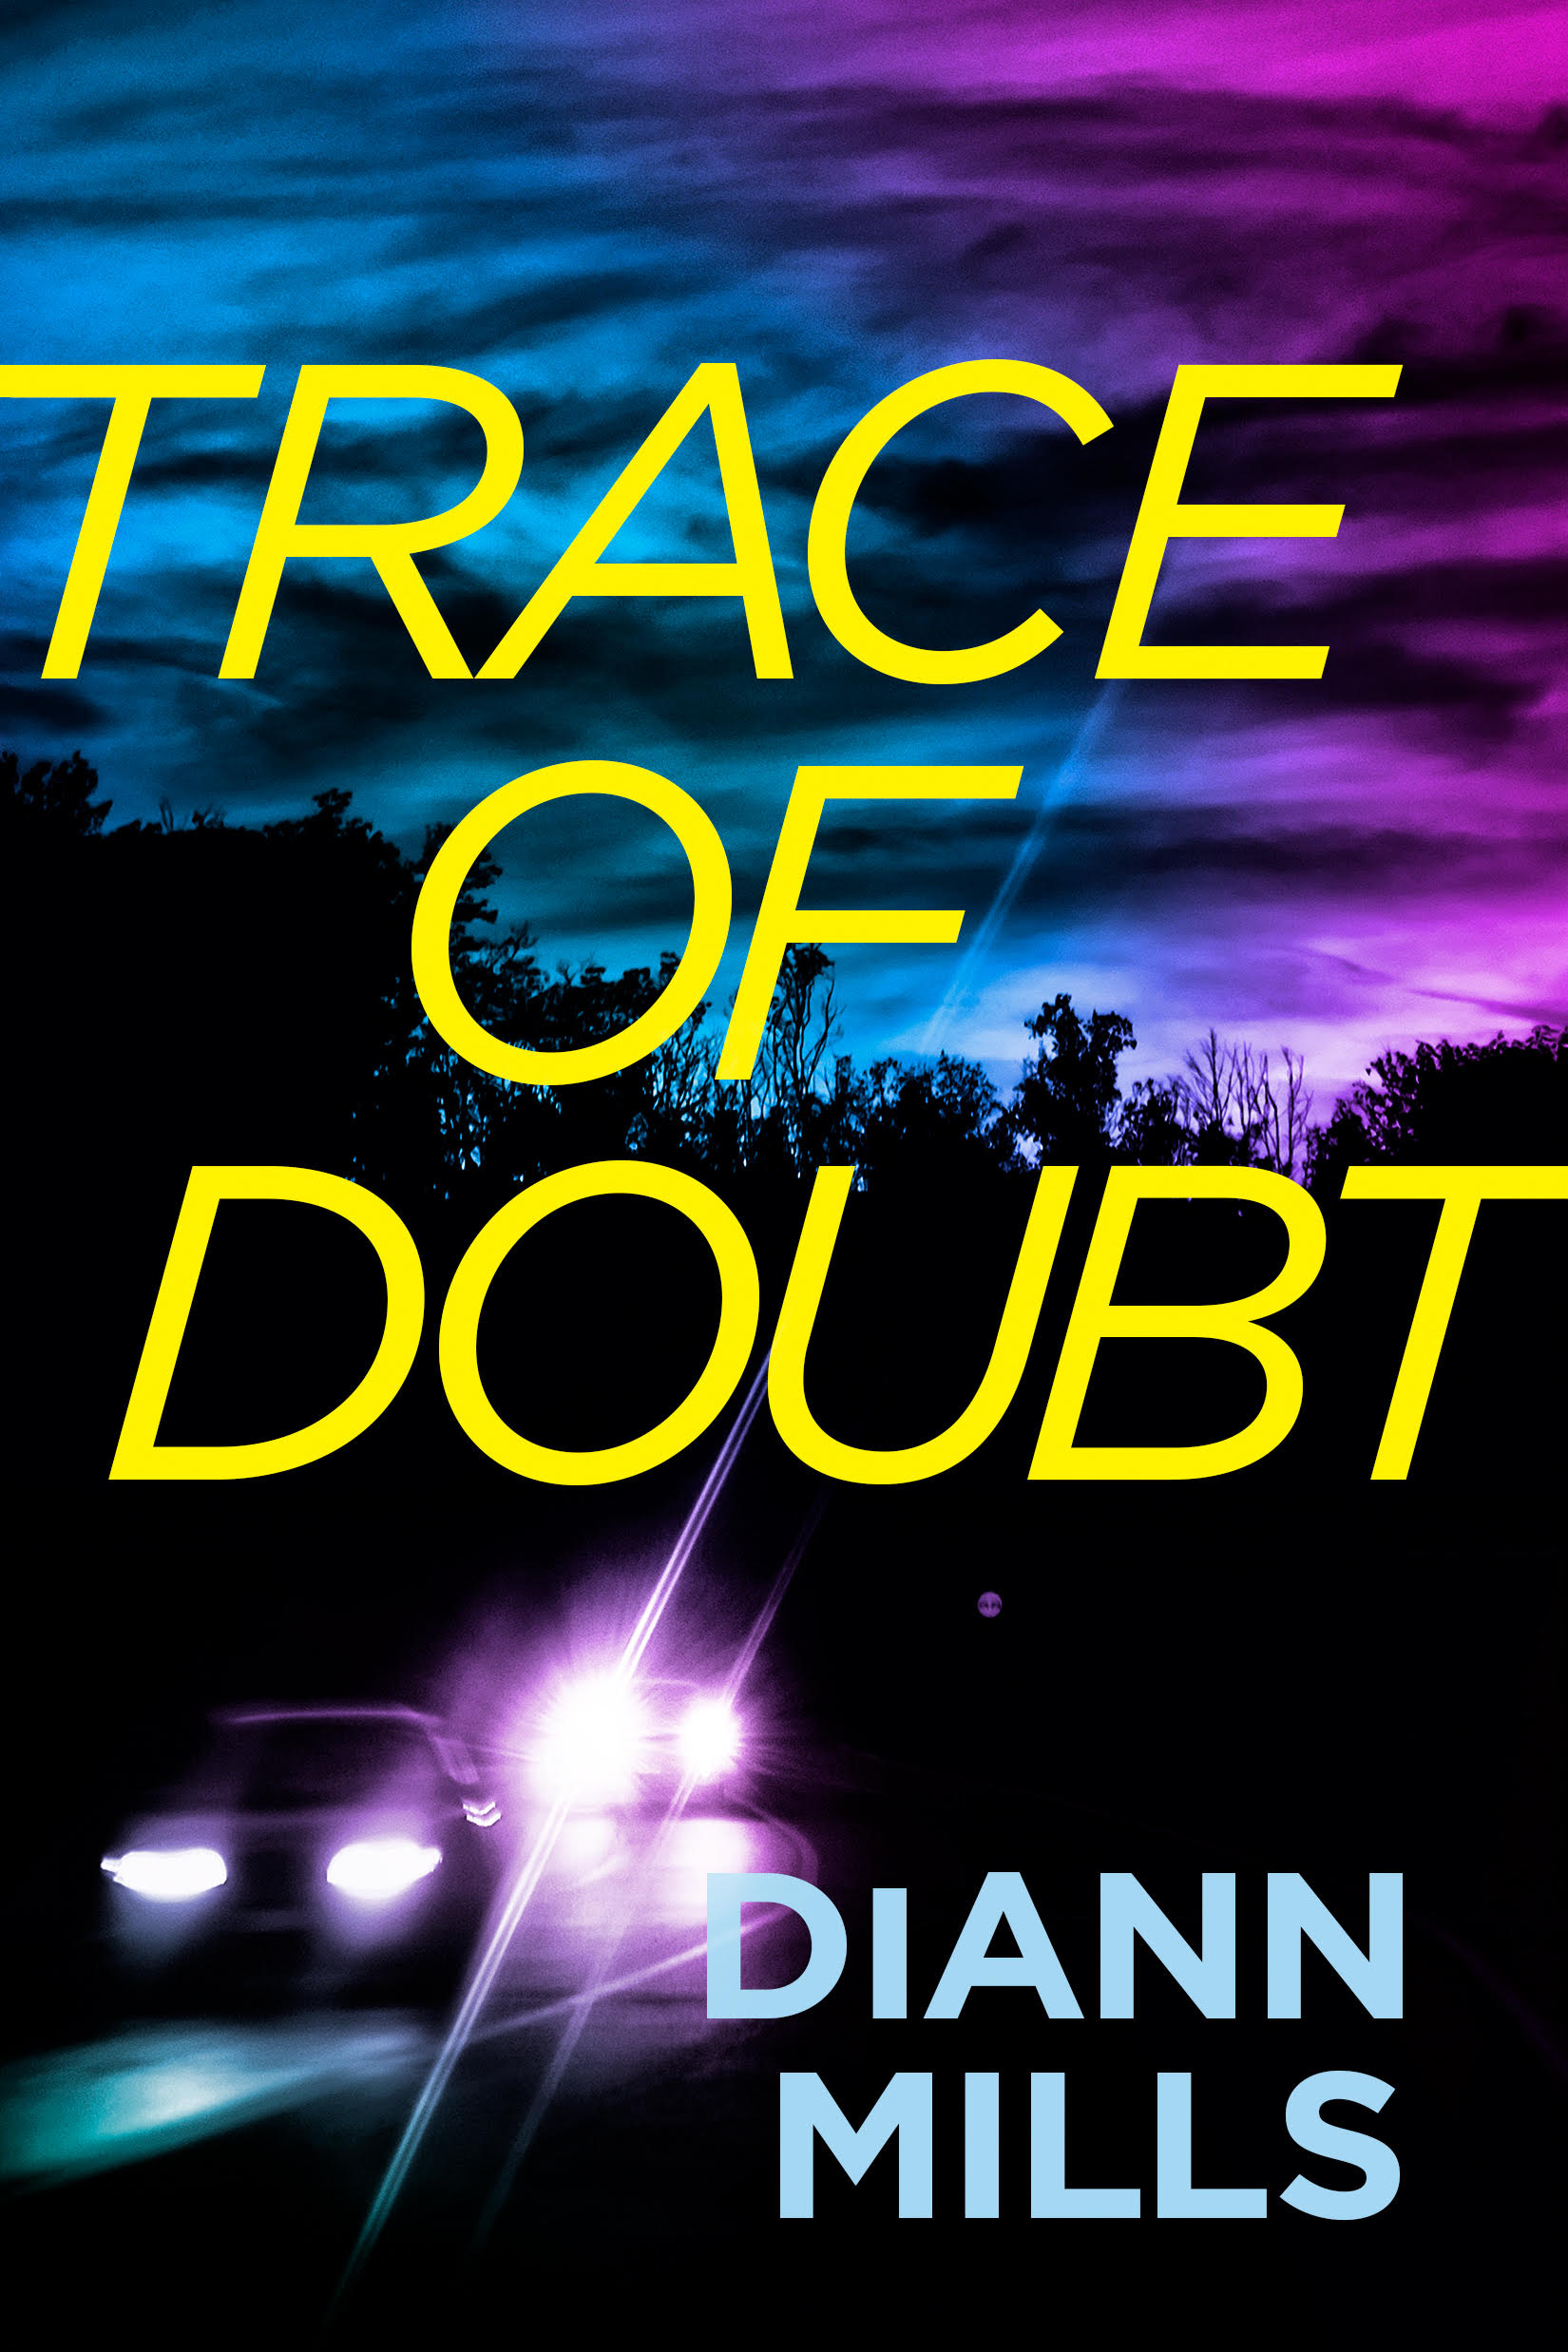 Trace of Doubt by DiAnn Mills